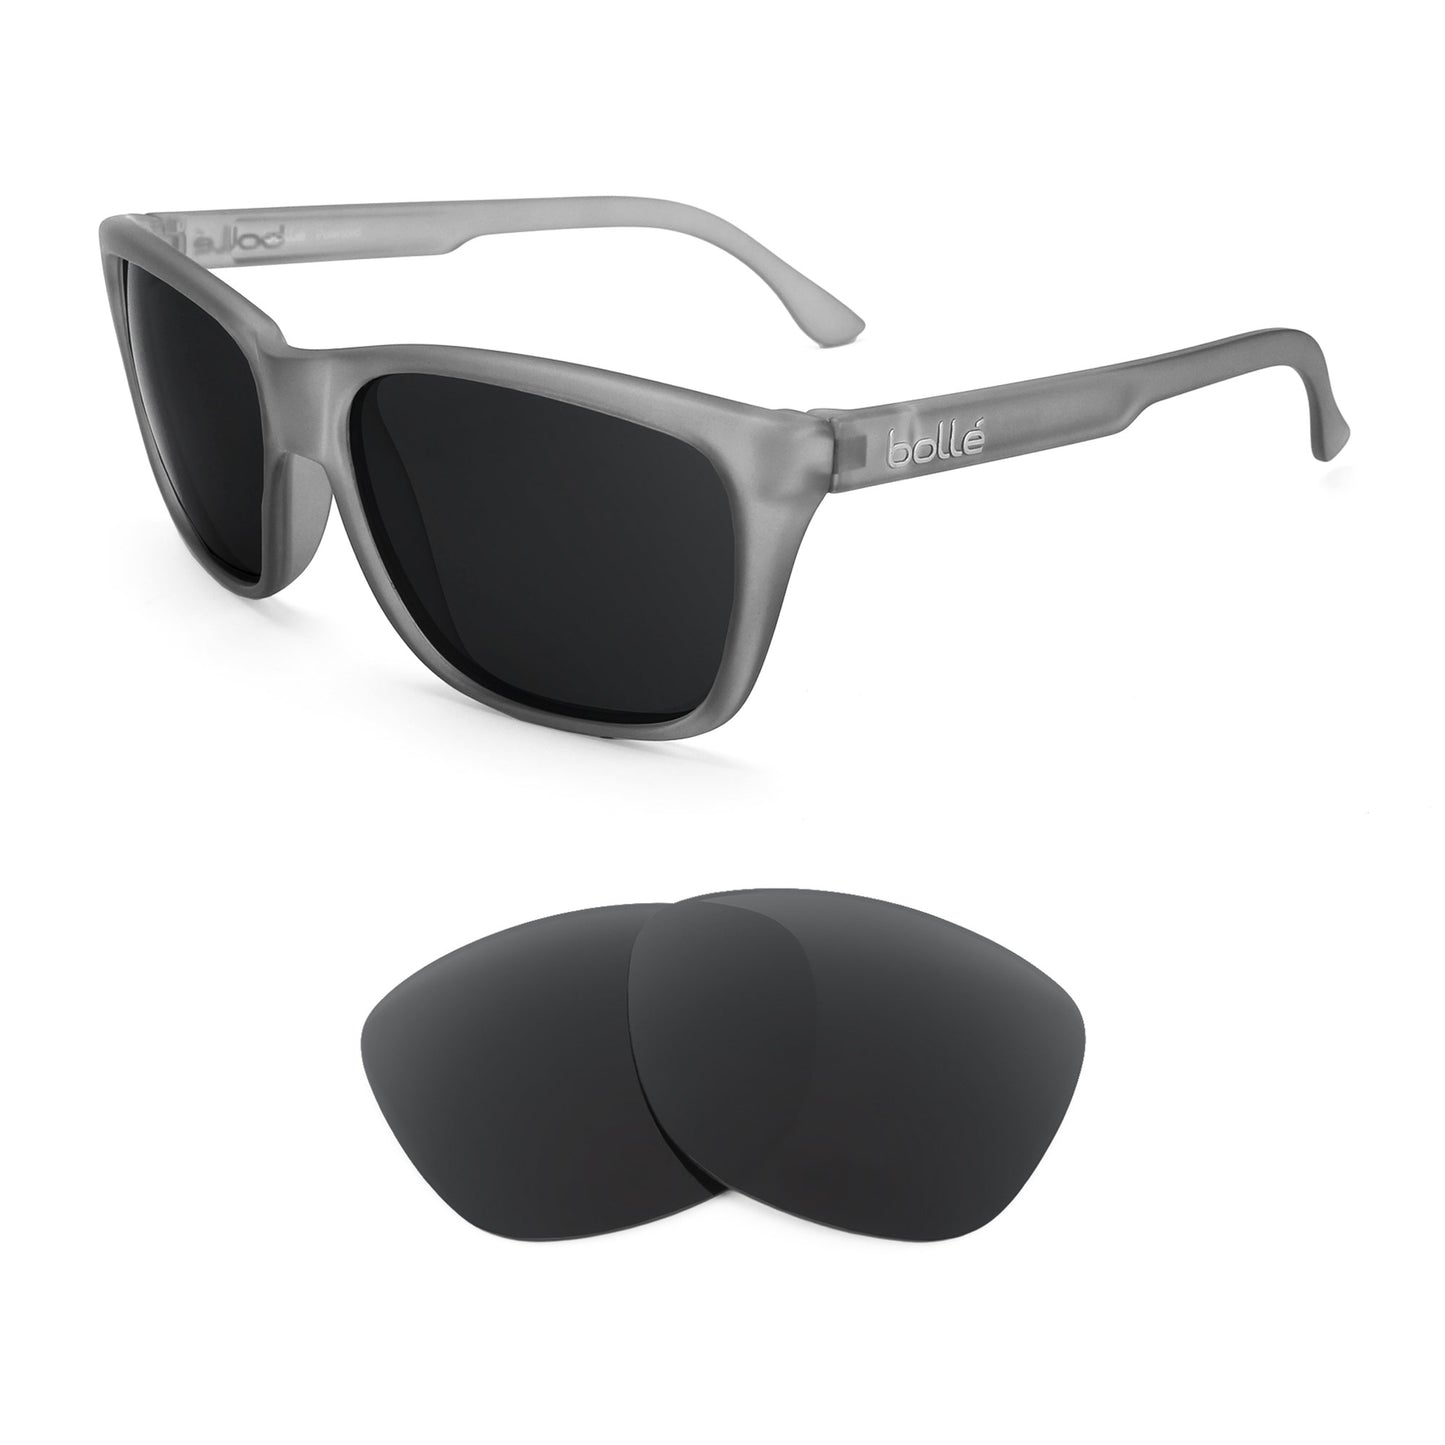 Bolle Damone sunglasses with replacement lenses